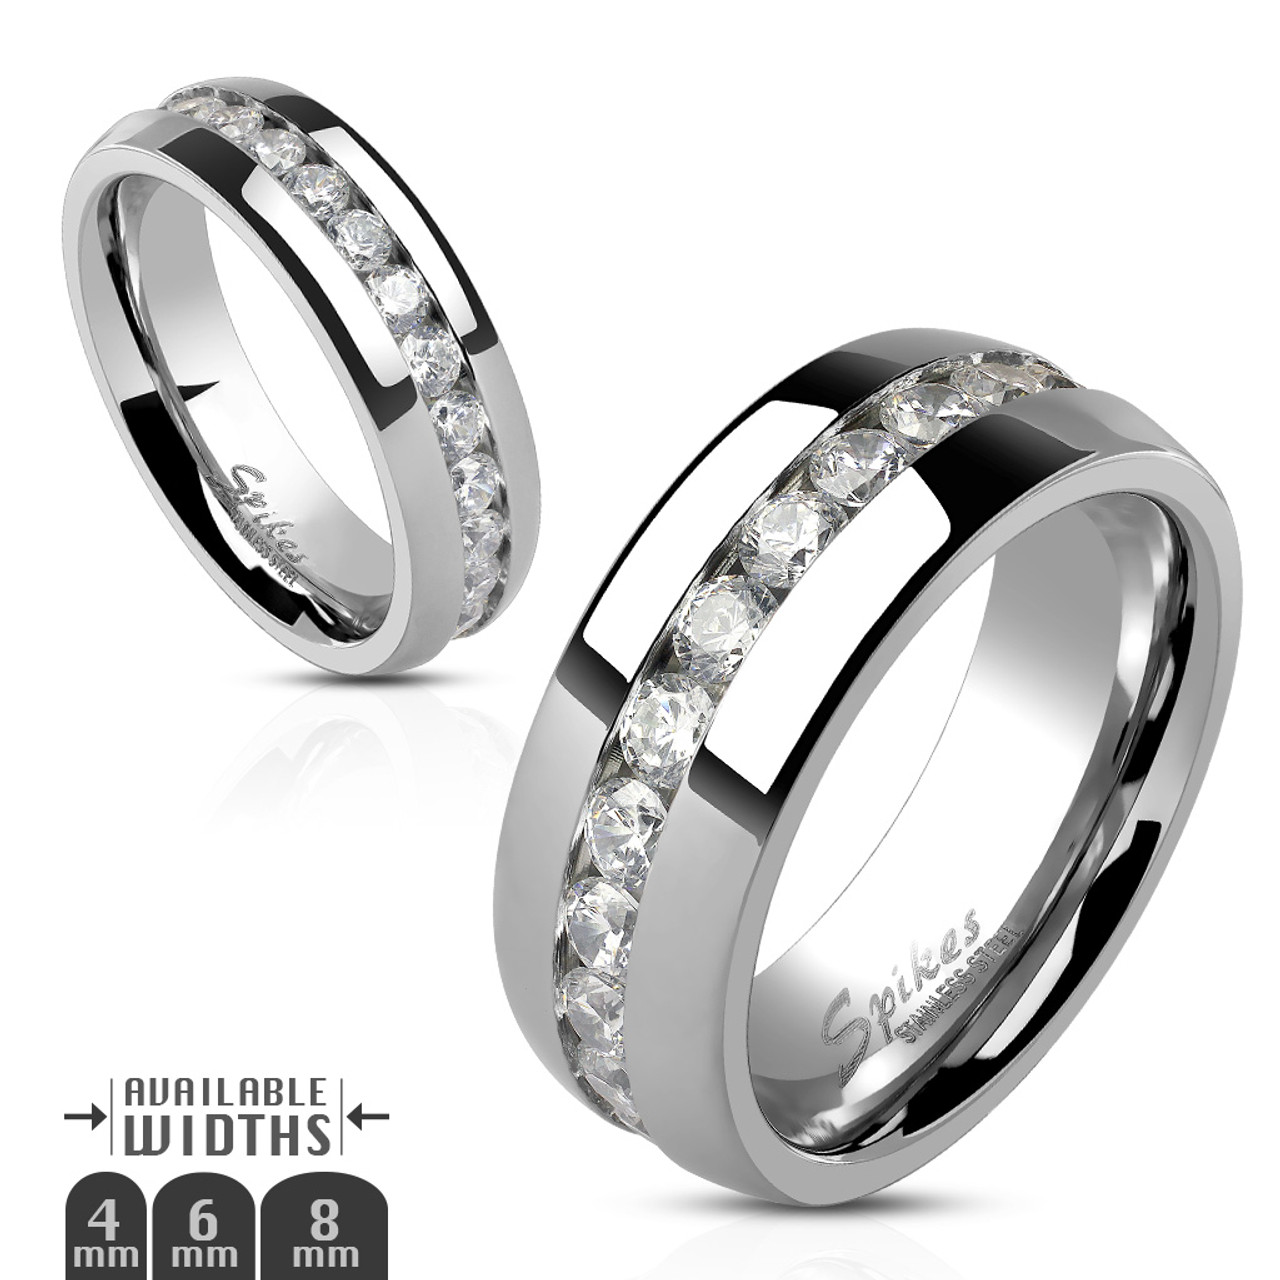 ST0W383-ARH1570 Stainless Steel Hers and His Princess Wedding Ring